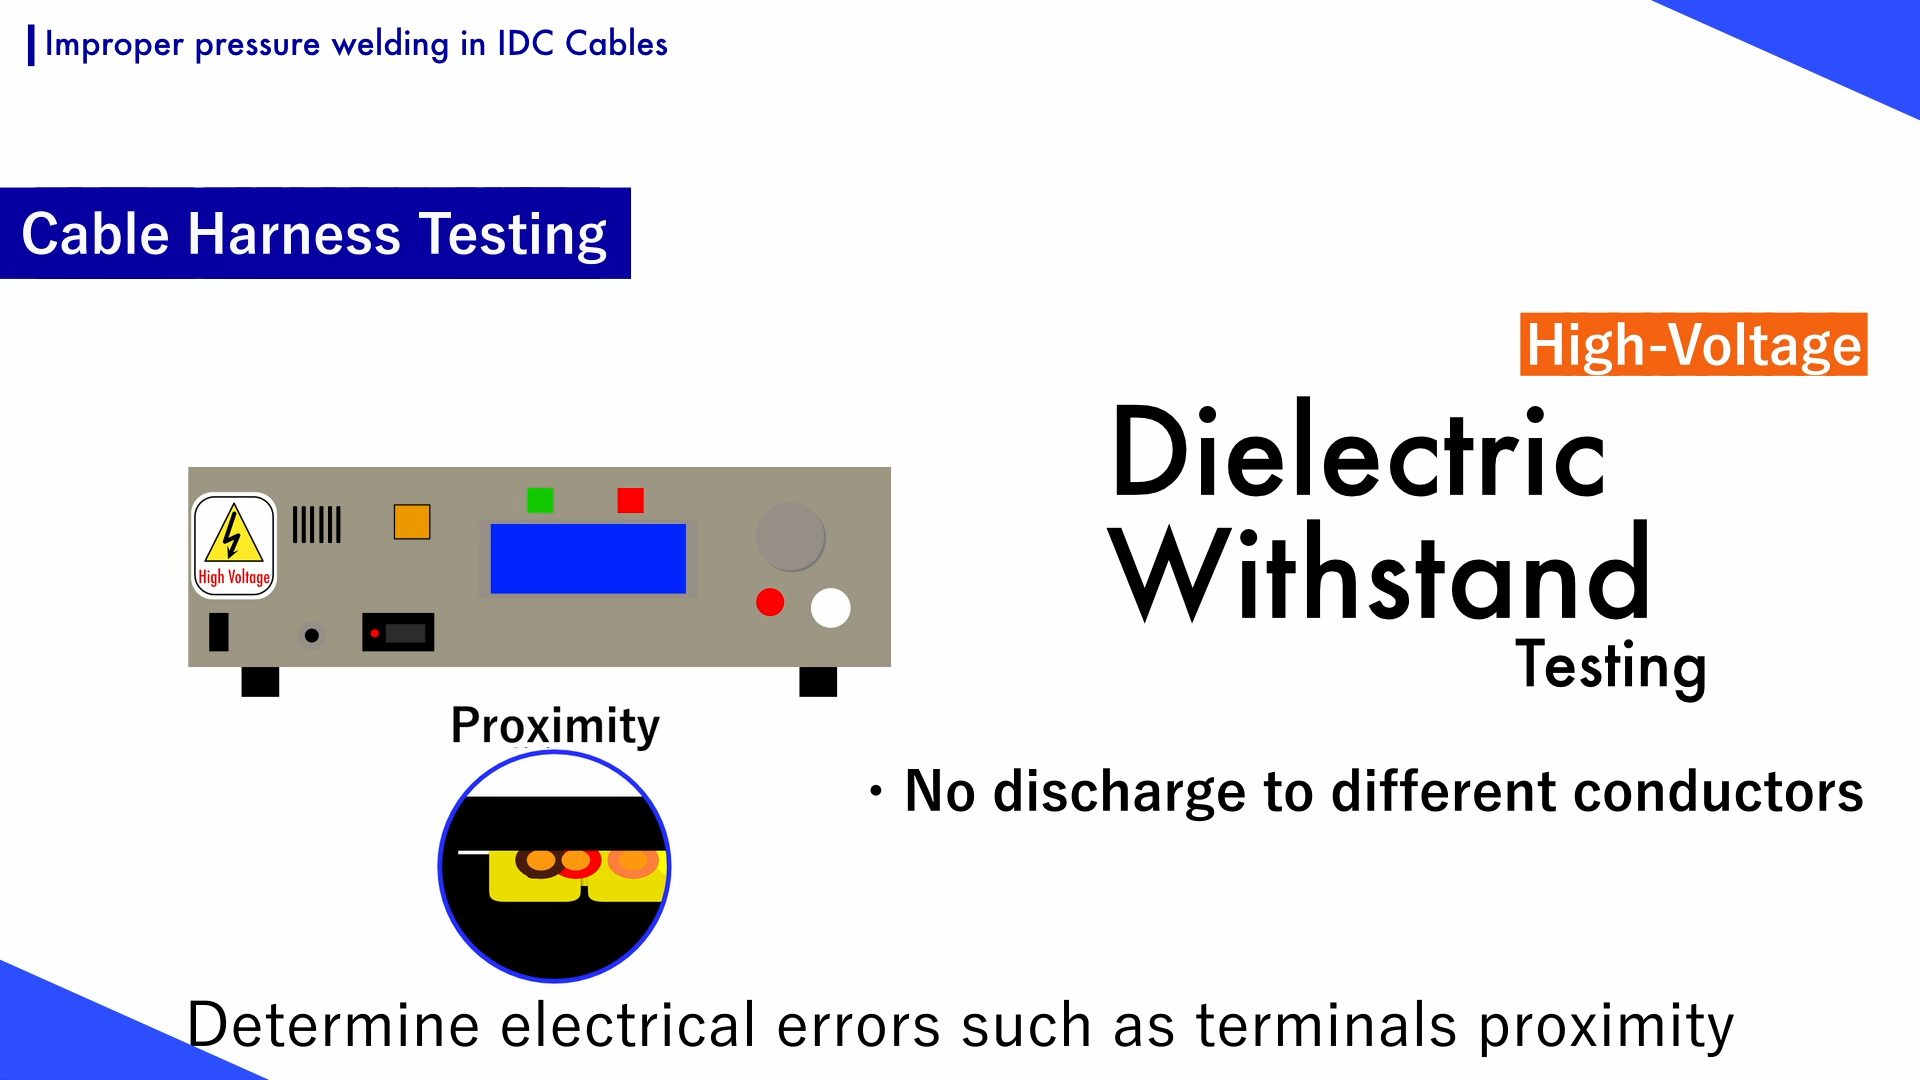 Introduction of Withstand Testing for Improper Pressure Welding in IDC Cables